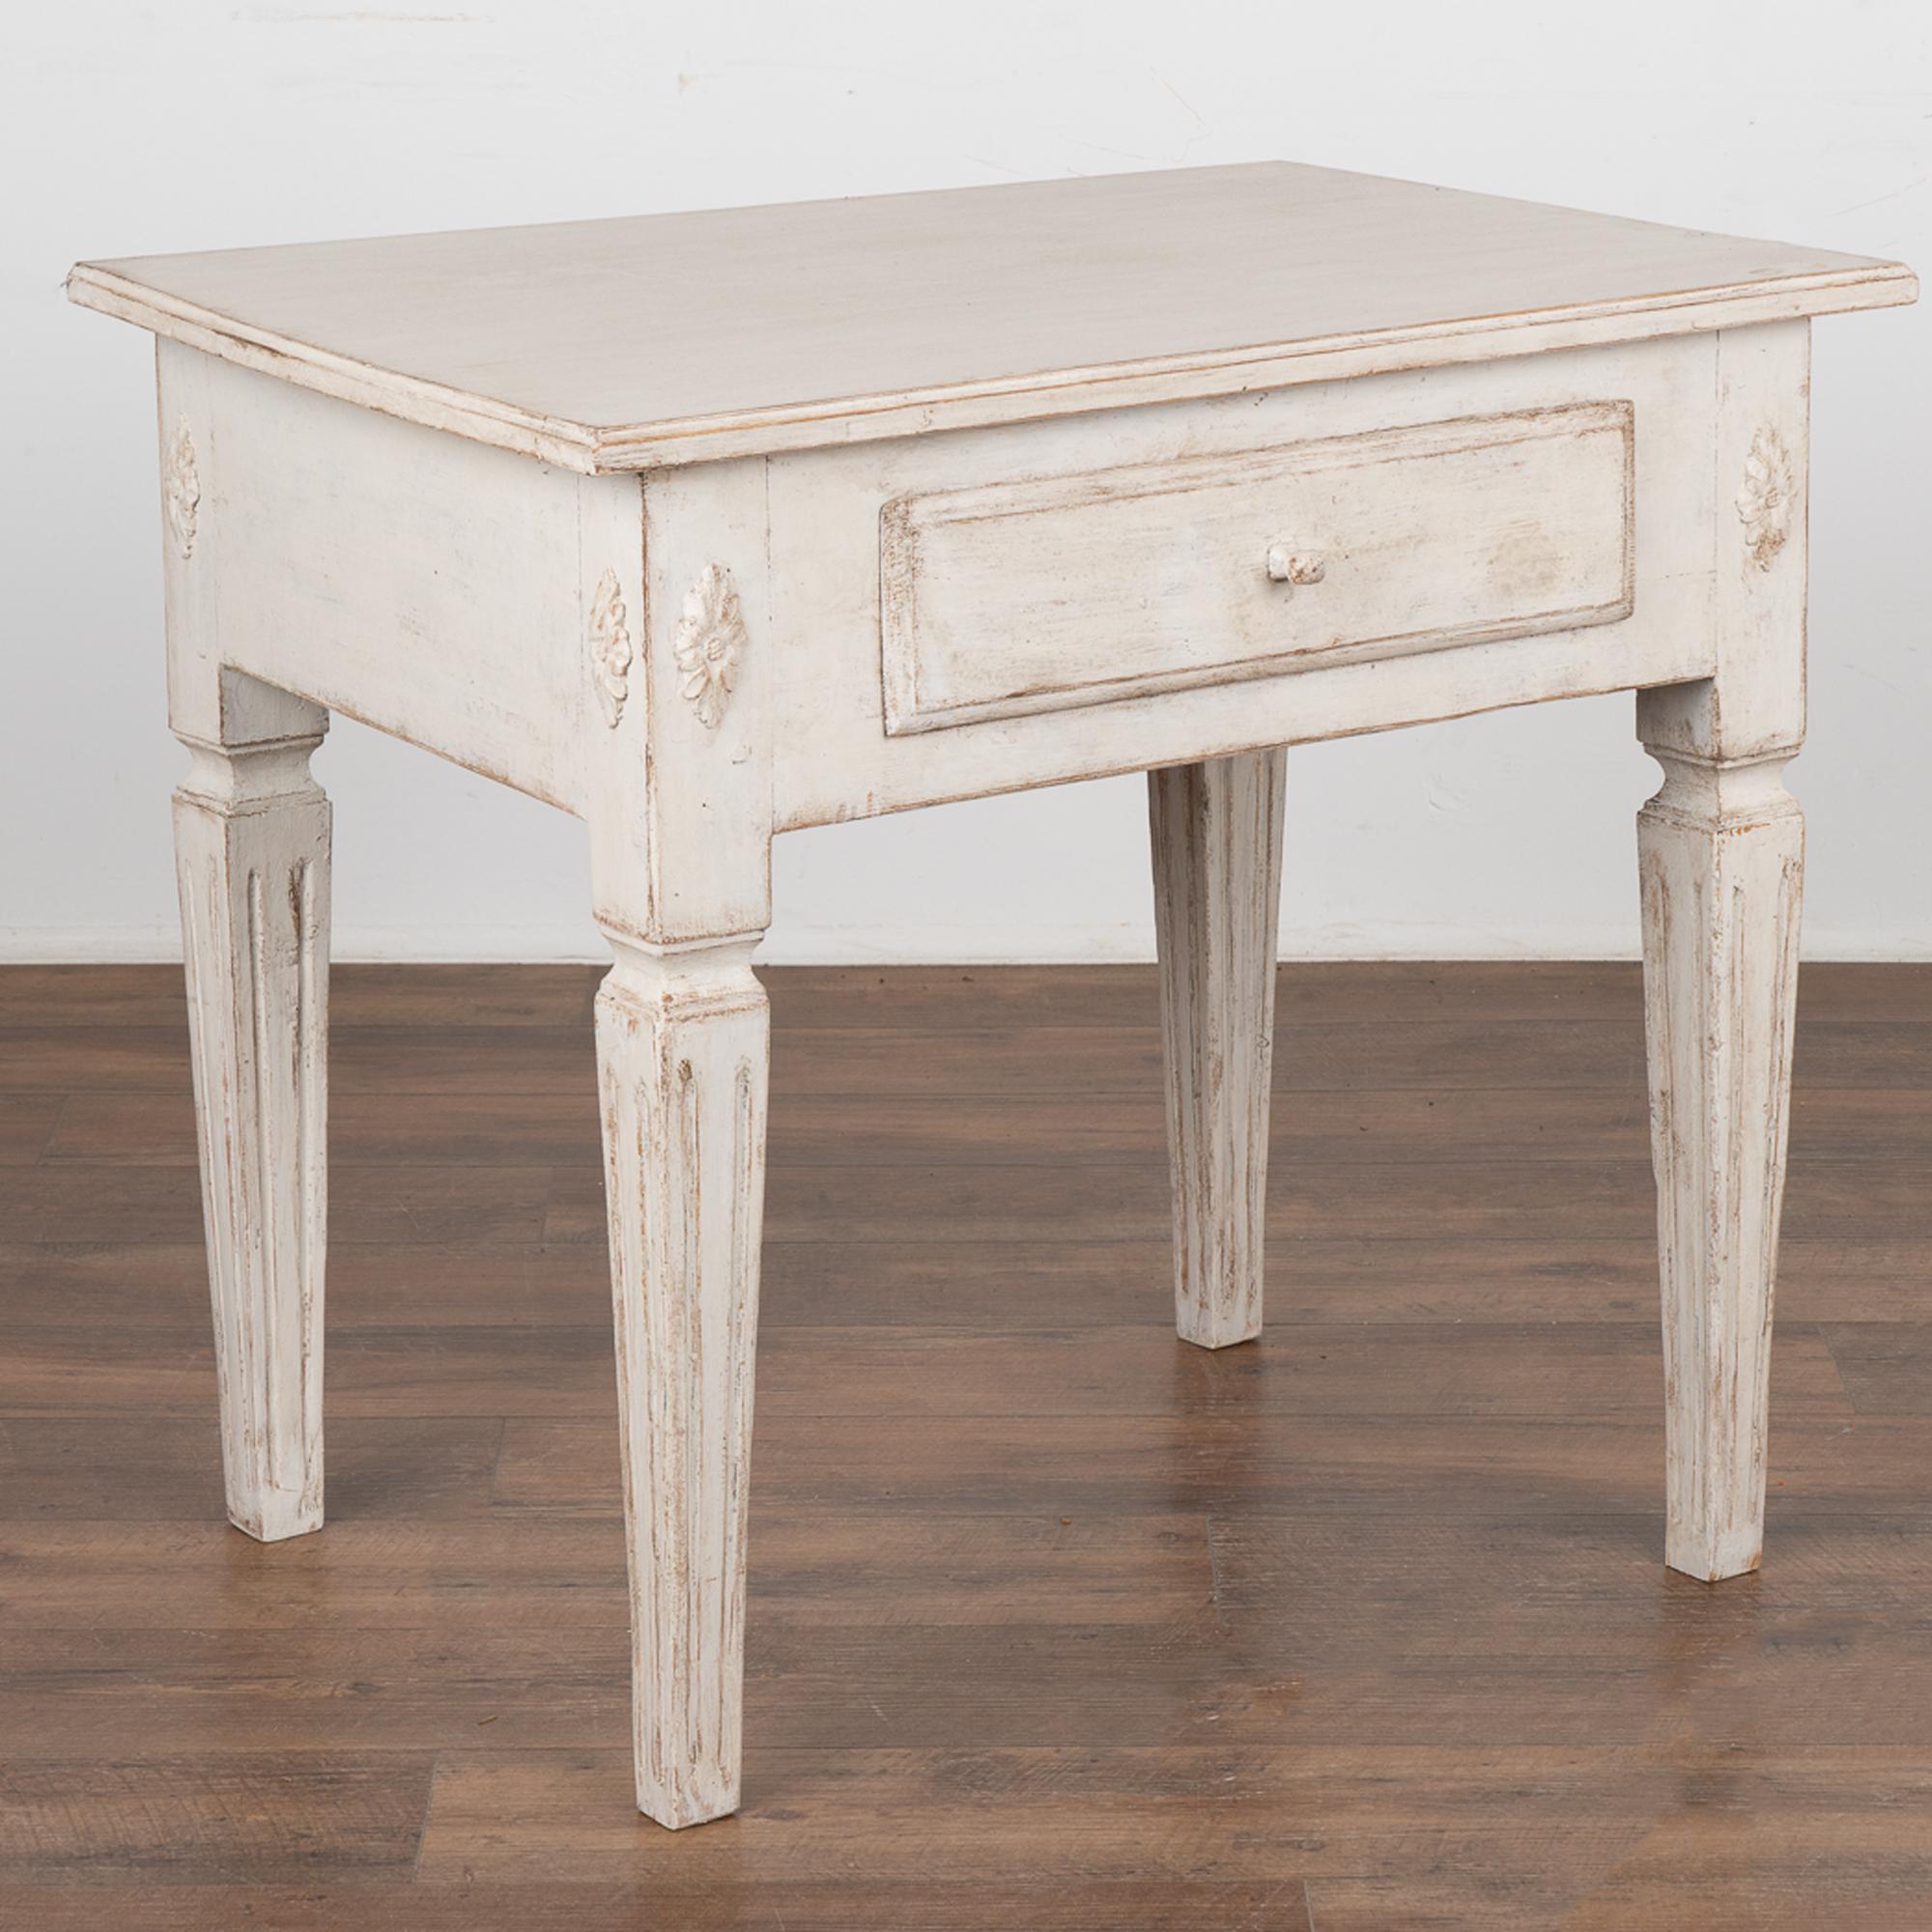 Antique Swedish Gustavian White Painted Side Table With Drawer.
Tapered fluted legs and decorative applied carving accents this useful table. 
Restored, later professionally applied white painted layered finish lightly distressed to fit age and